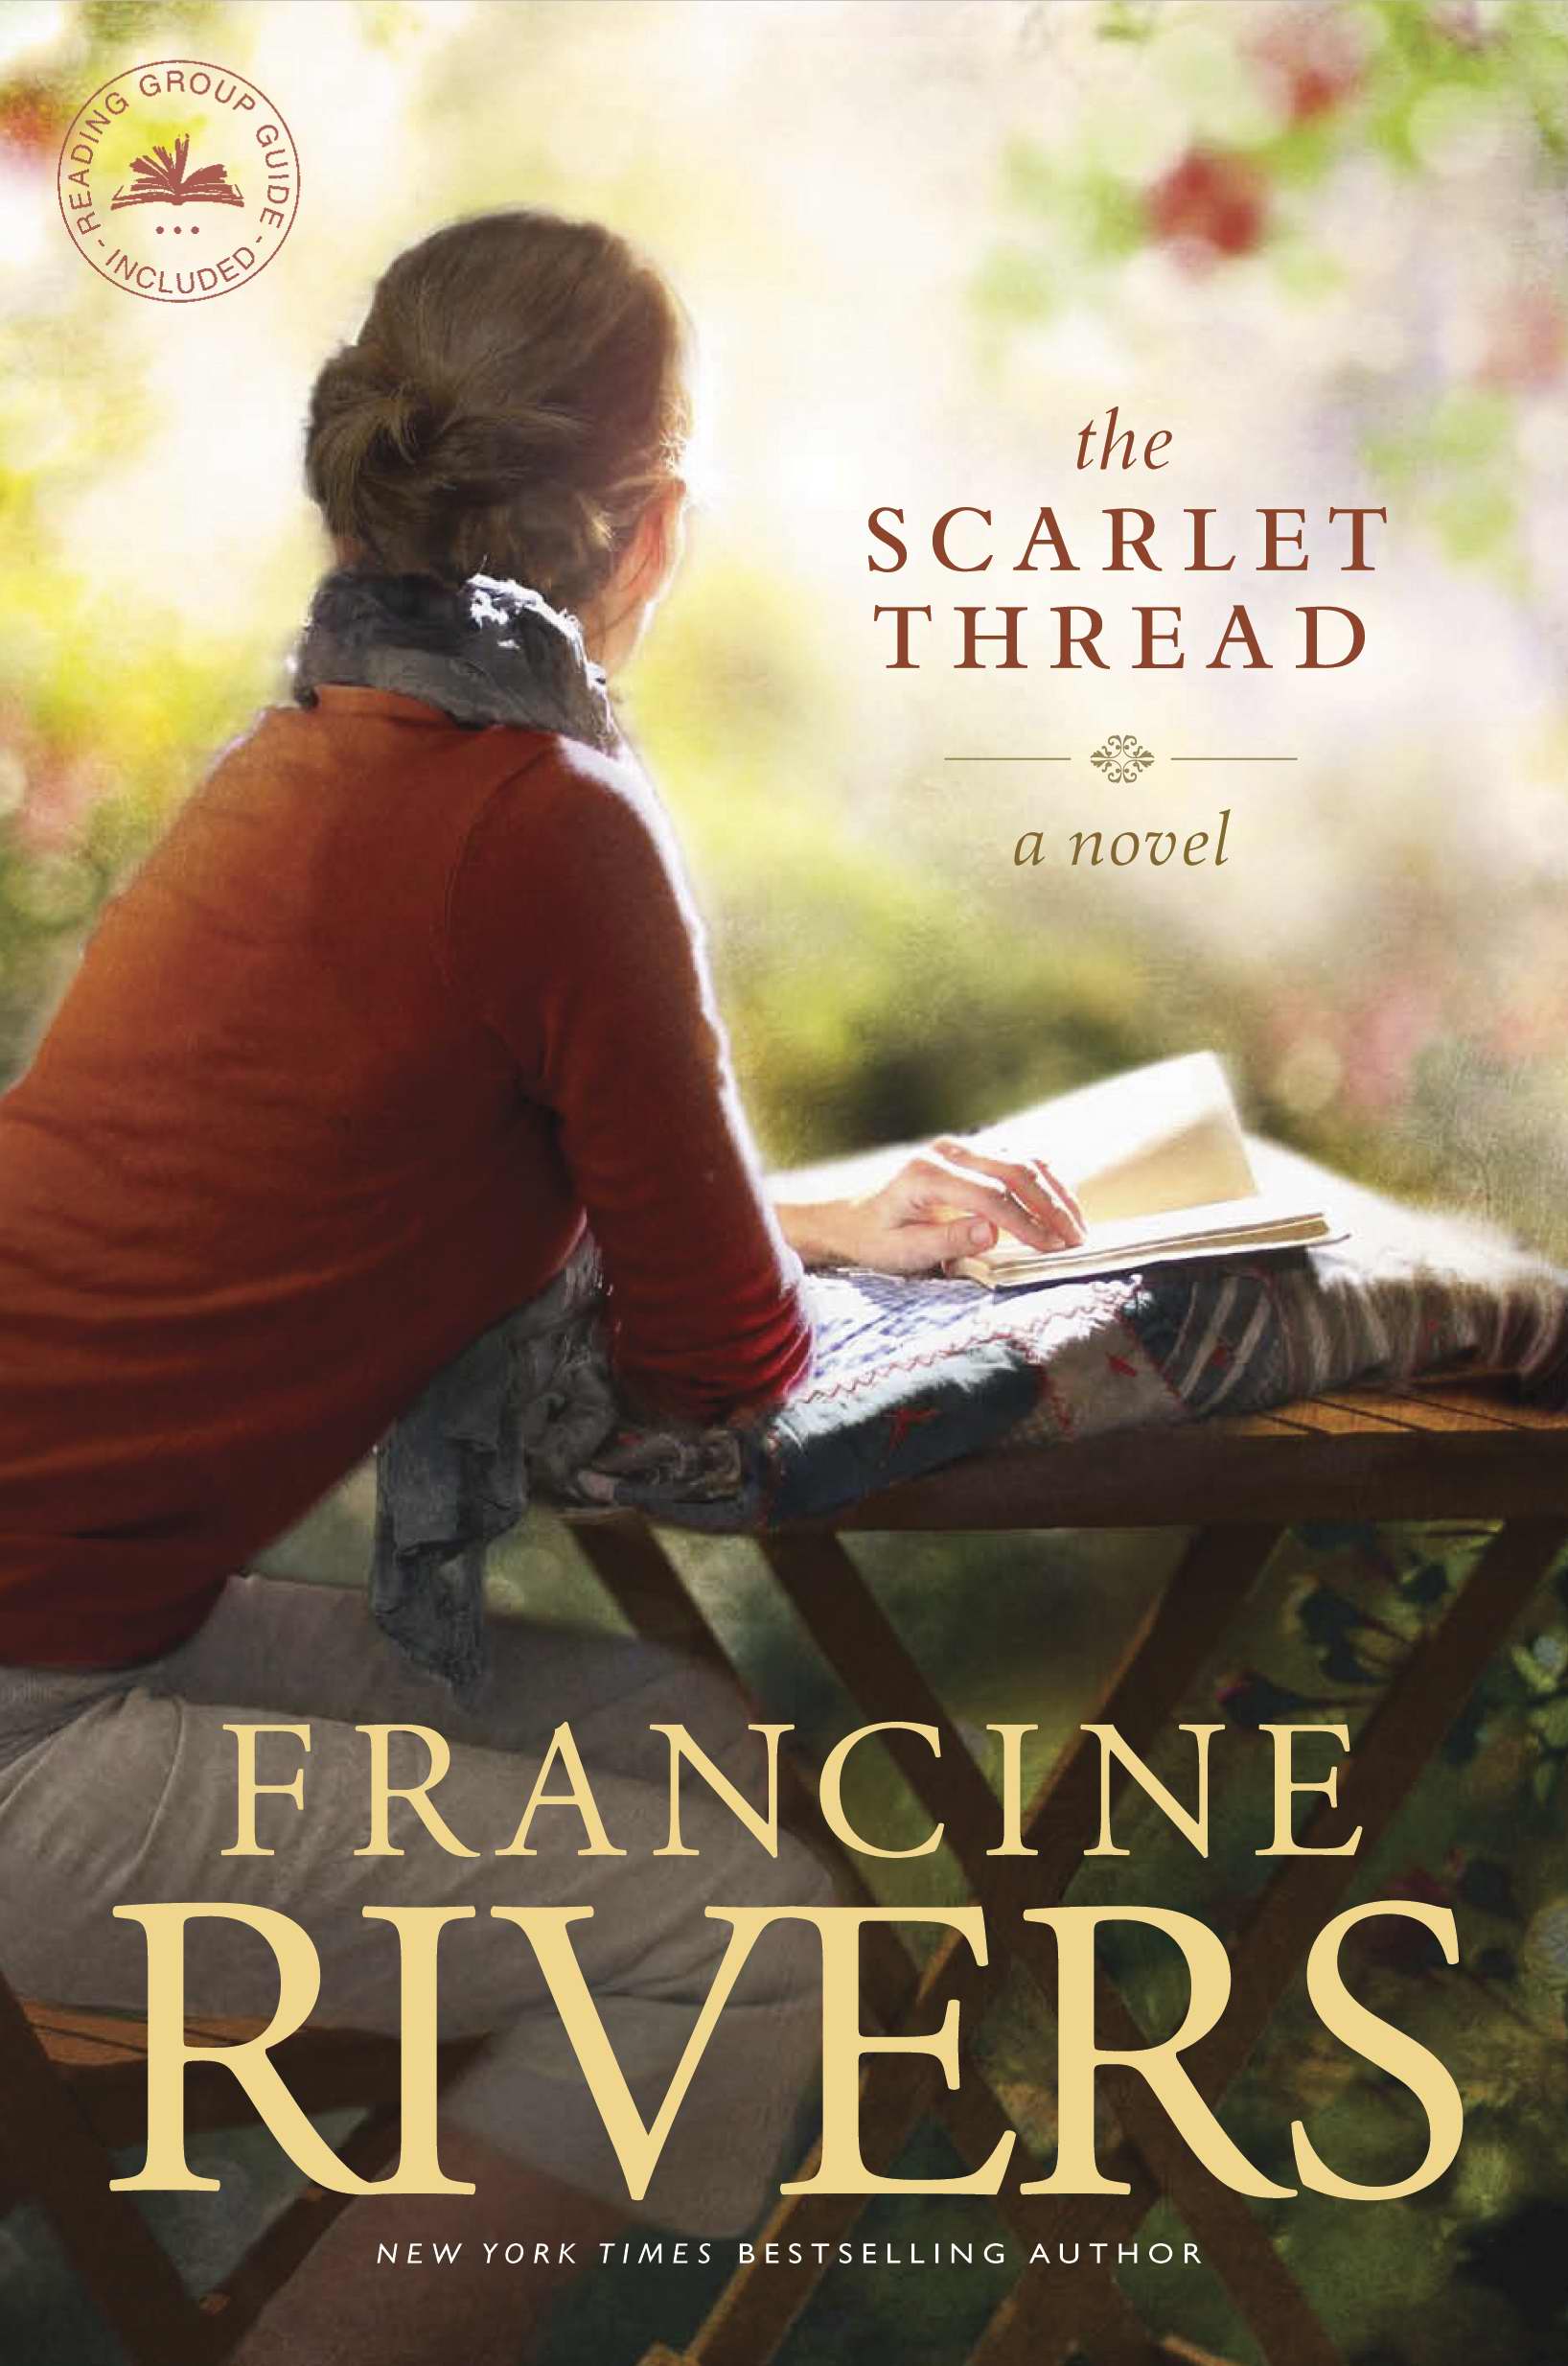 Image of The Scarlet Thread other